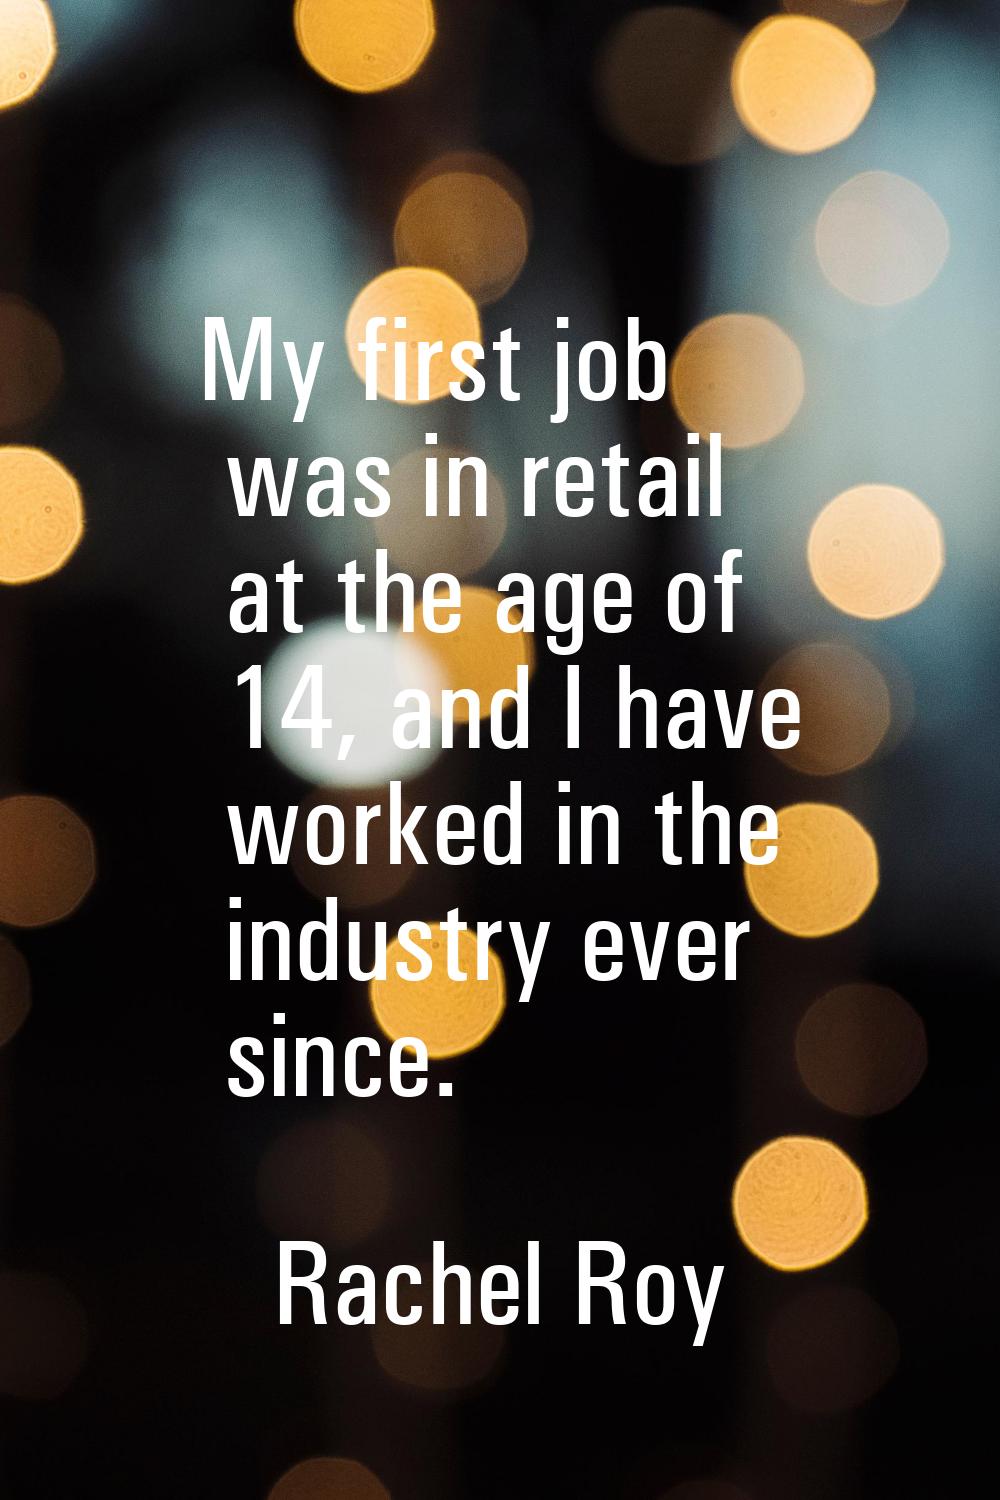 My first job was in retail at the age of 14, and I have worked in the industry ever since.